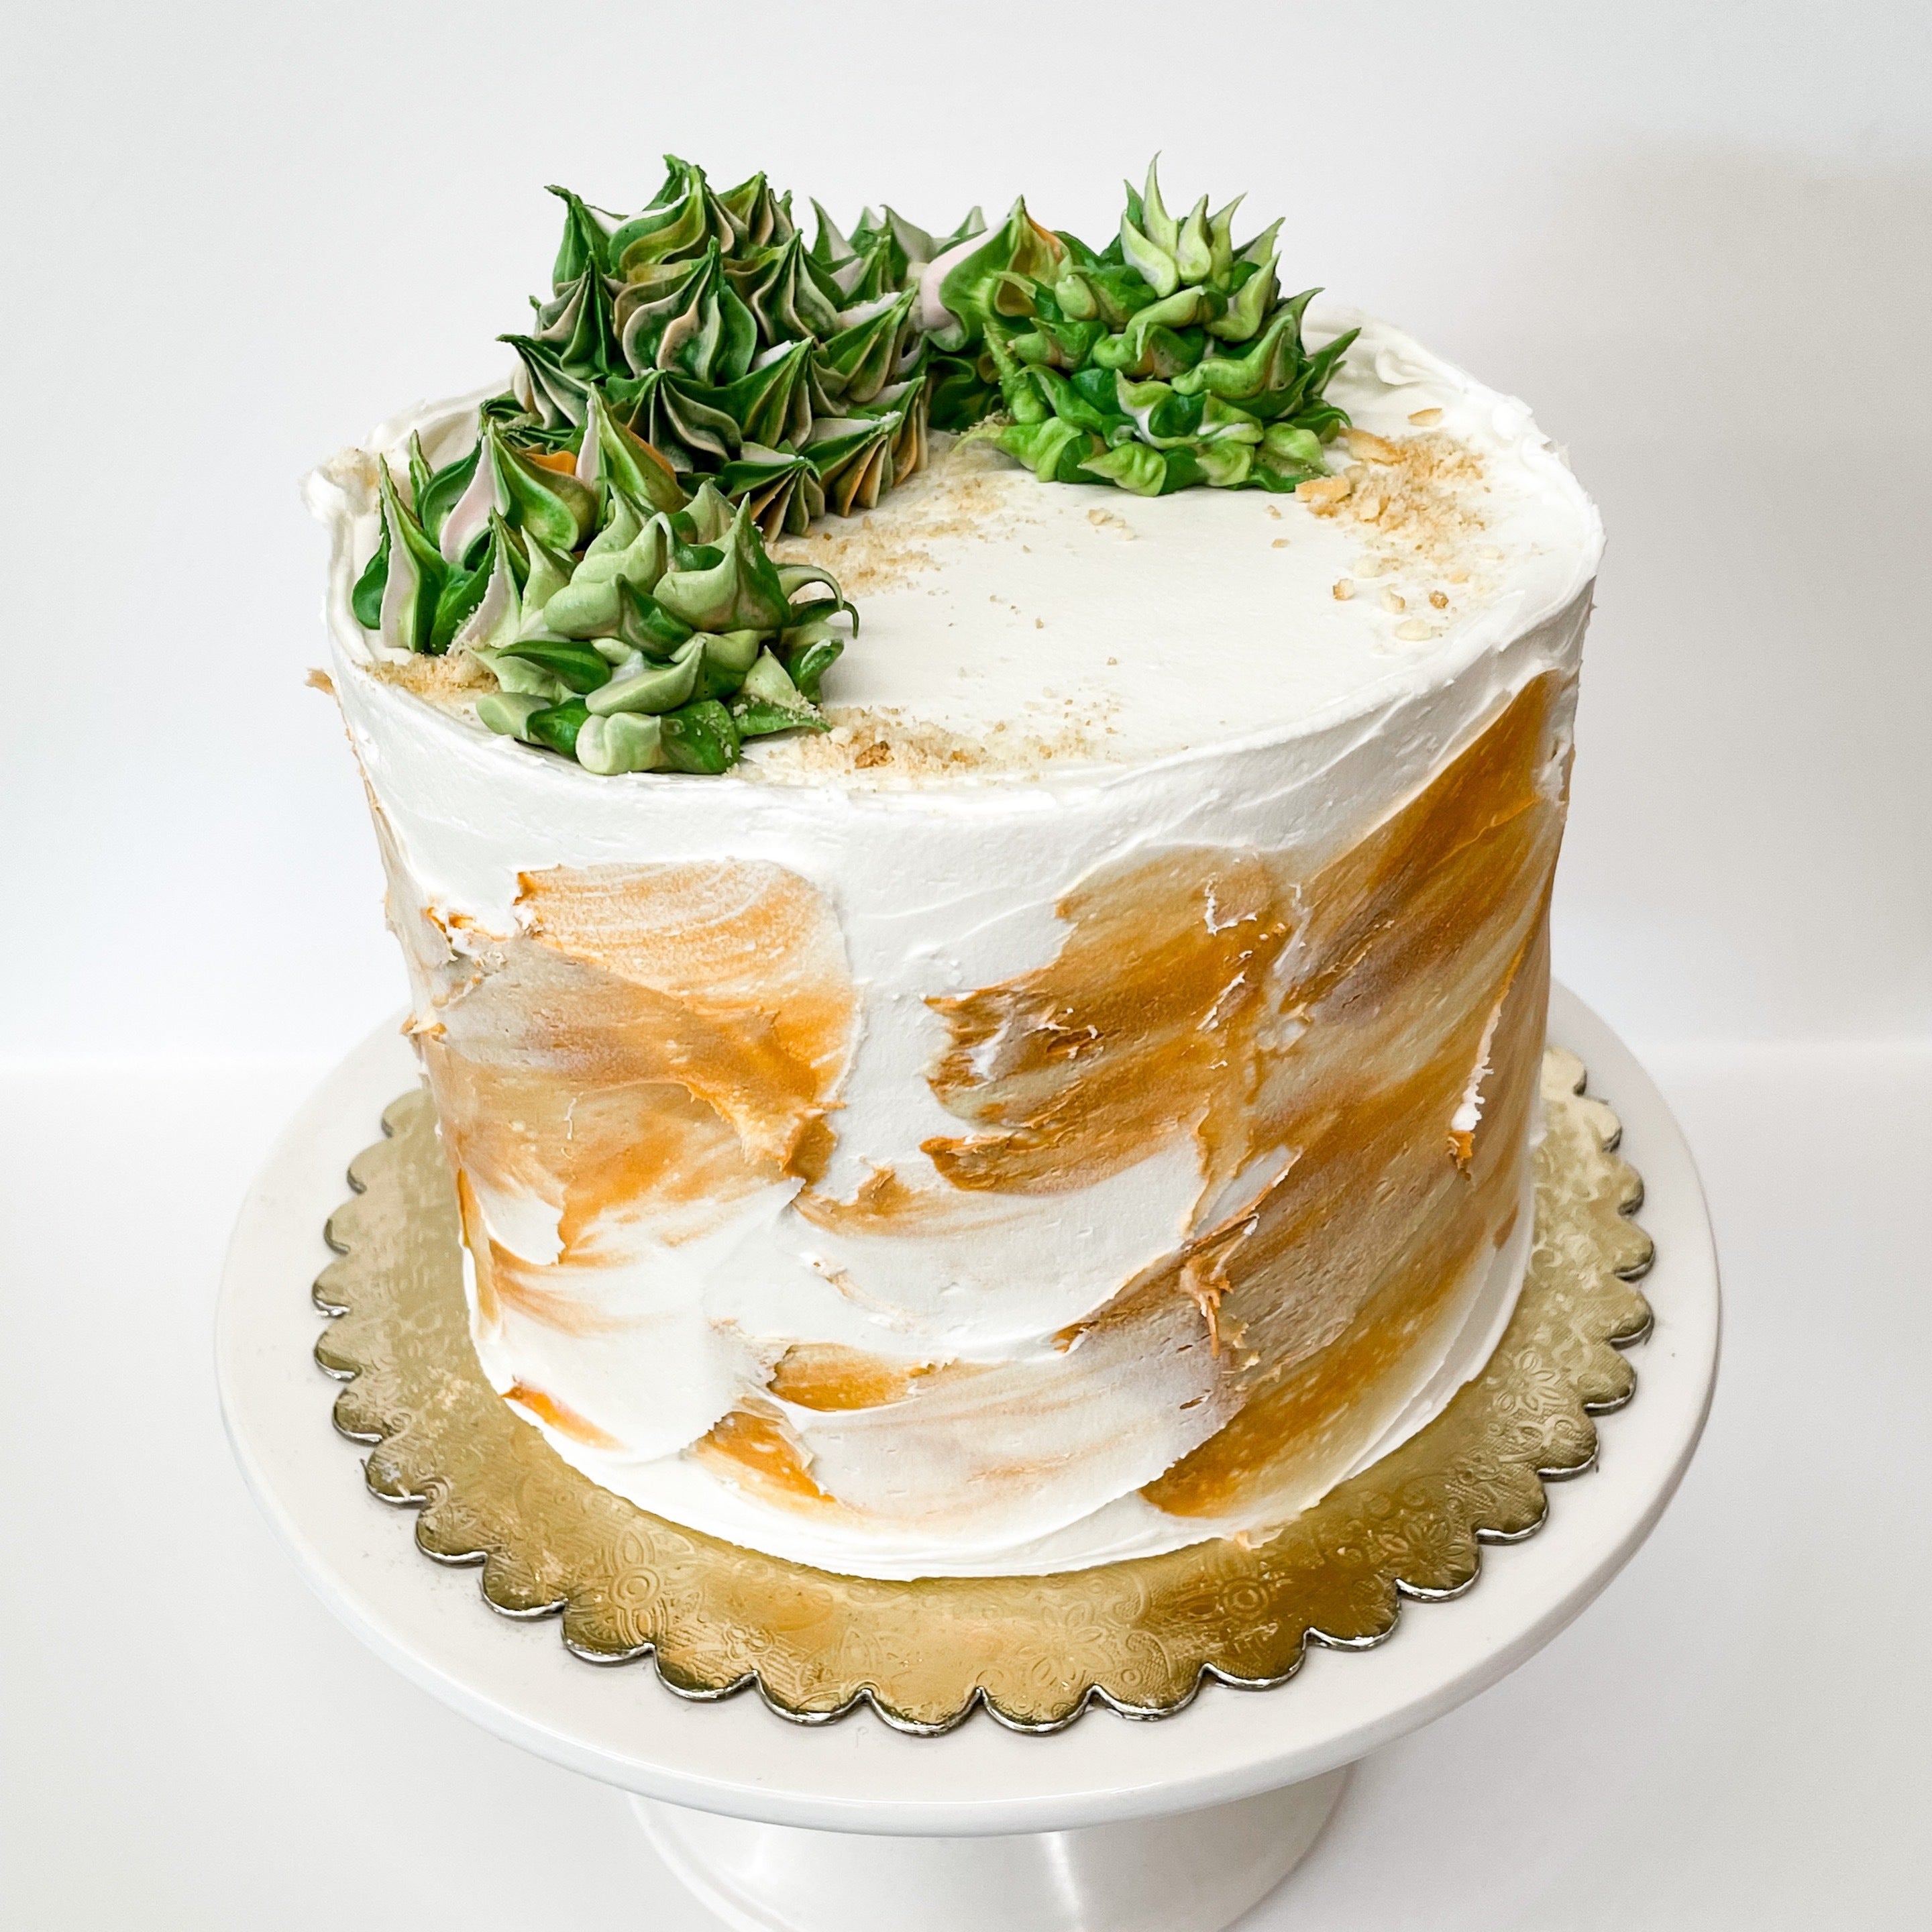 Trefzger's Decorated Cake with Piped Succulents — Trefzger's Bakery